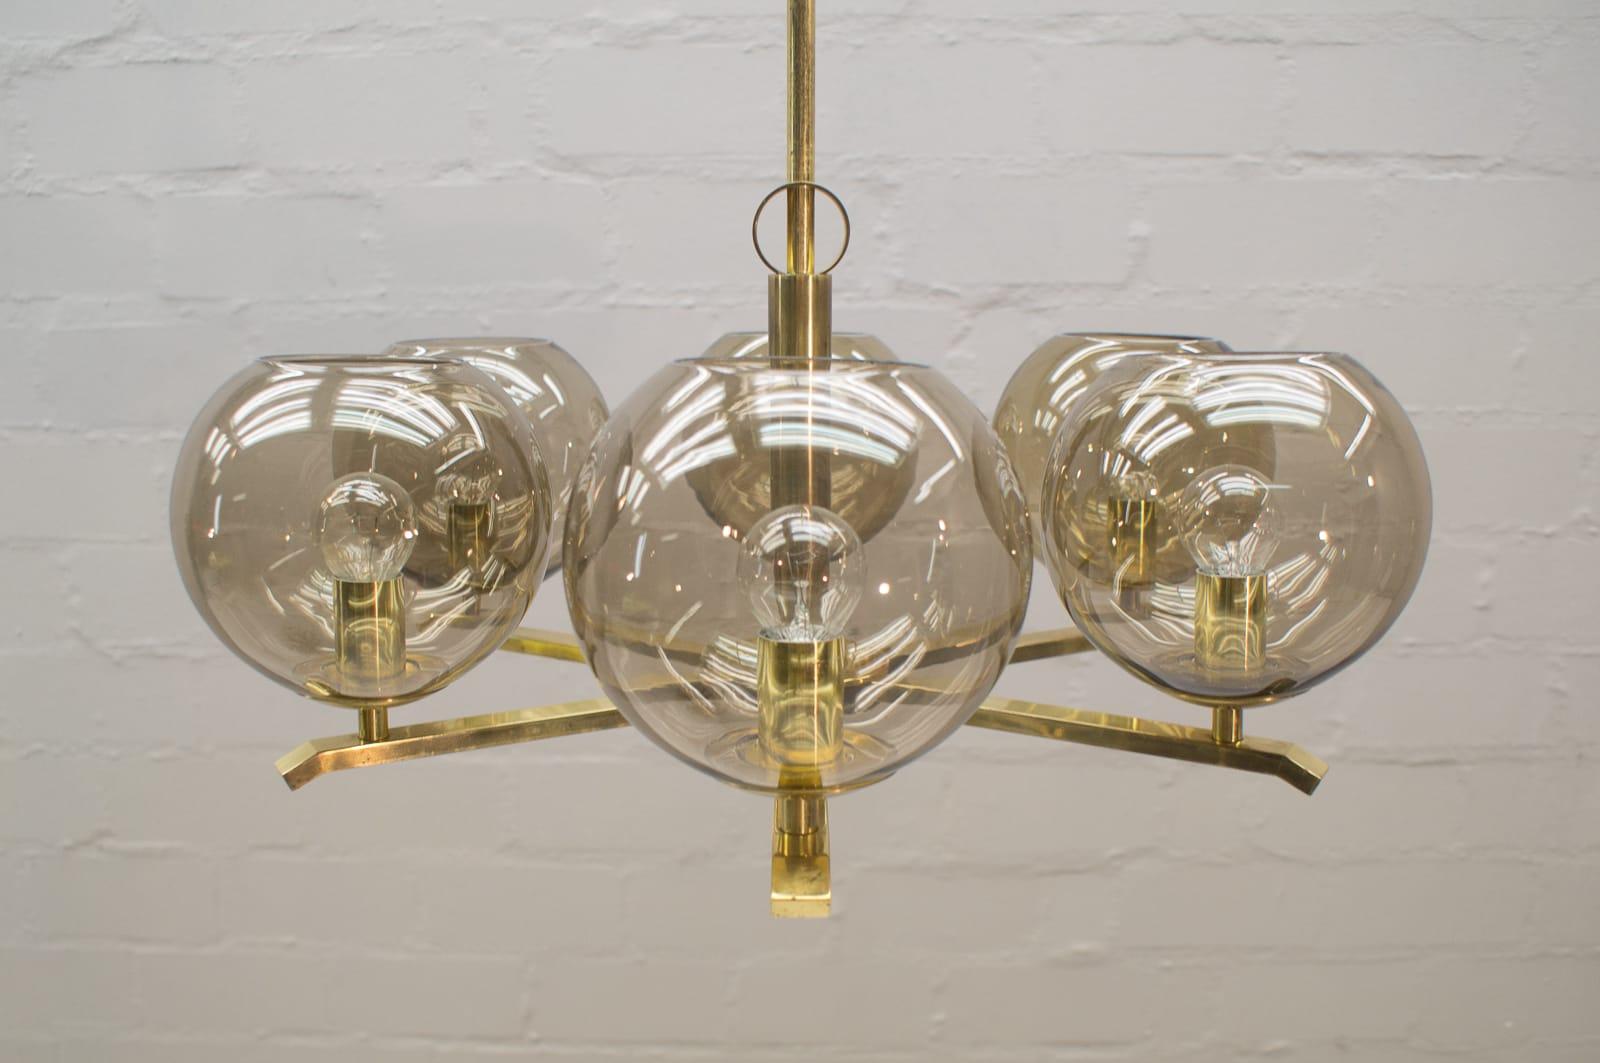 This eight-armed ceiling light was produced in Germany between the 1950s and 1960s. The lamp has its original wiring and requires eight E14 Edison screw fit bulbs. Each lamp shade measures 14 cm.